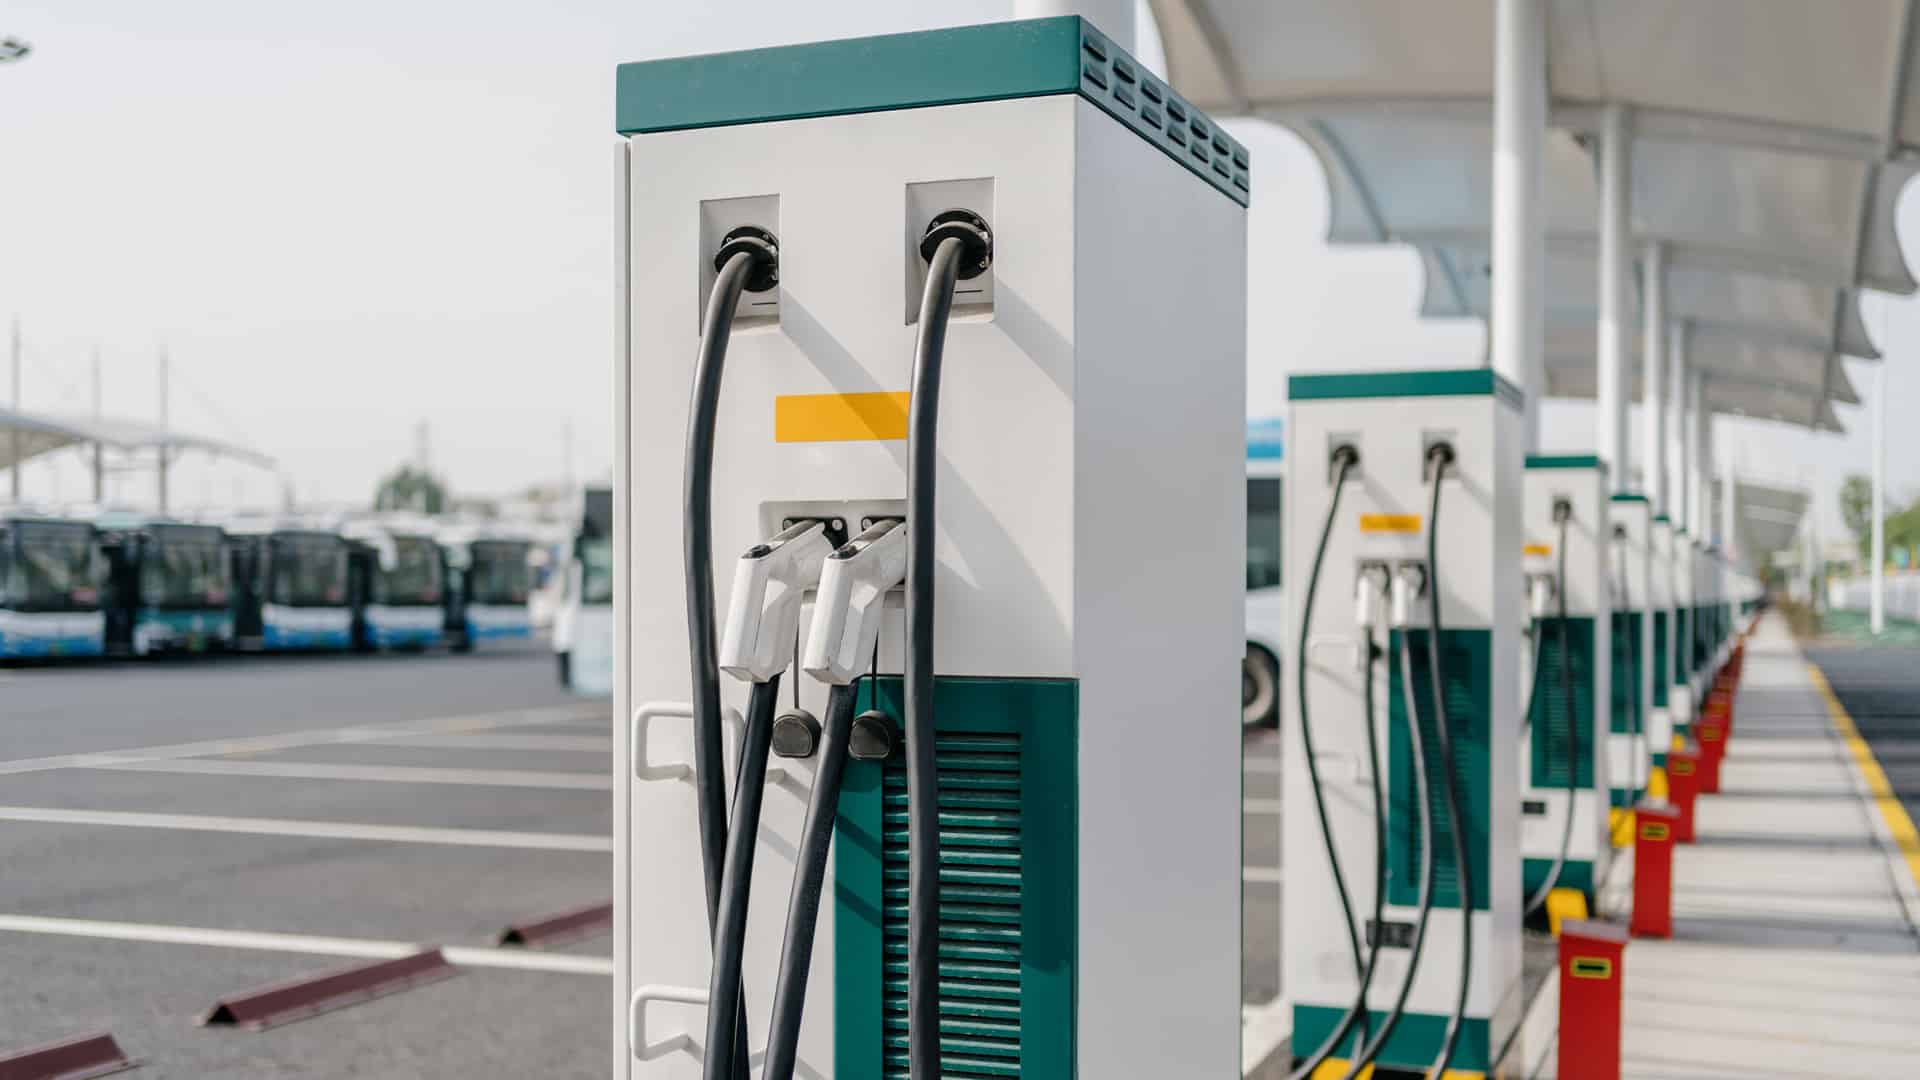 Facilitated around 2300 EV charging points in Delhi, 900 more coming: BSES